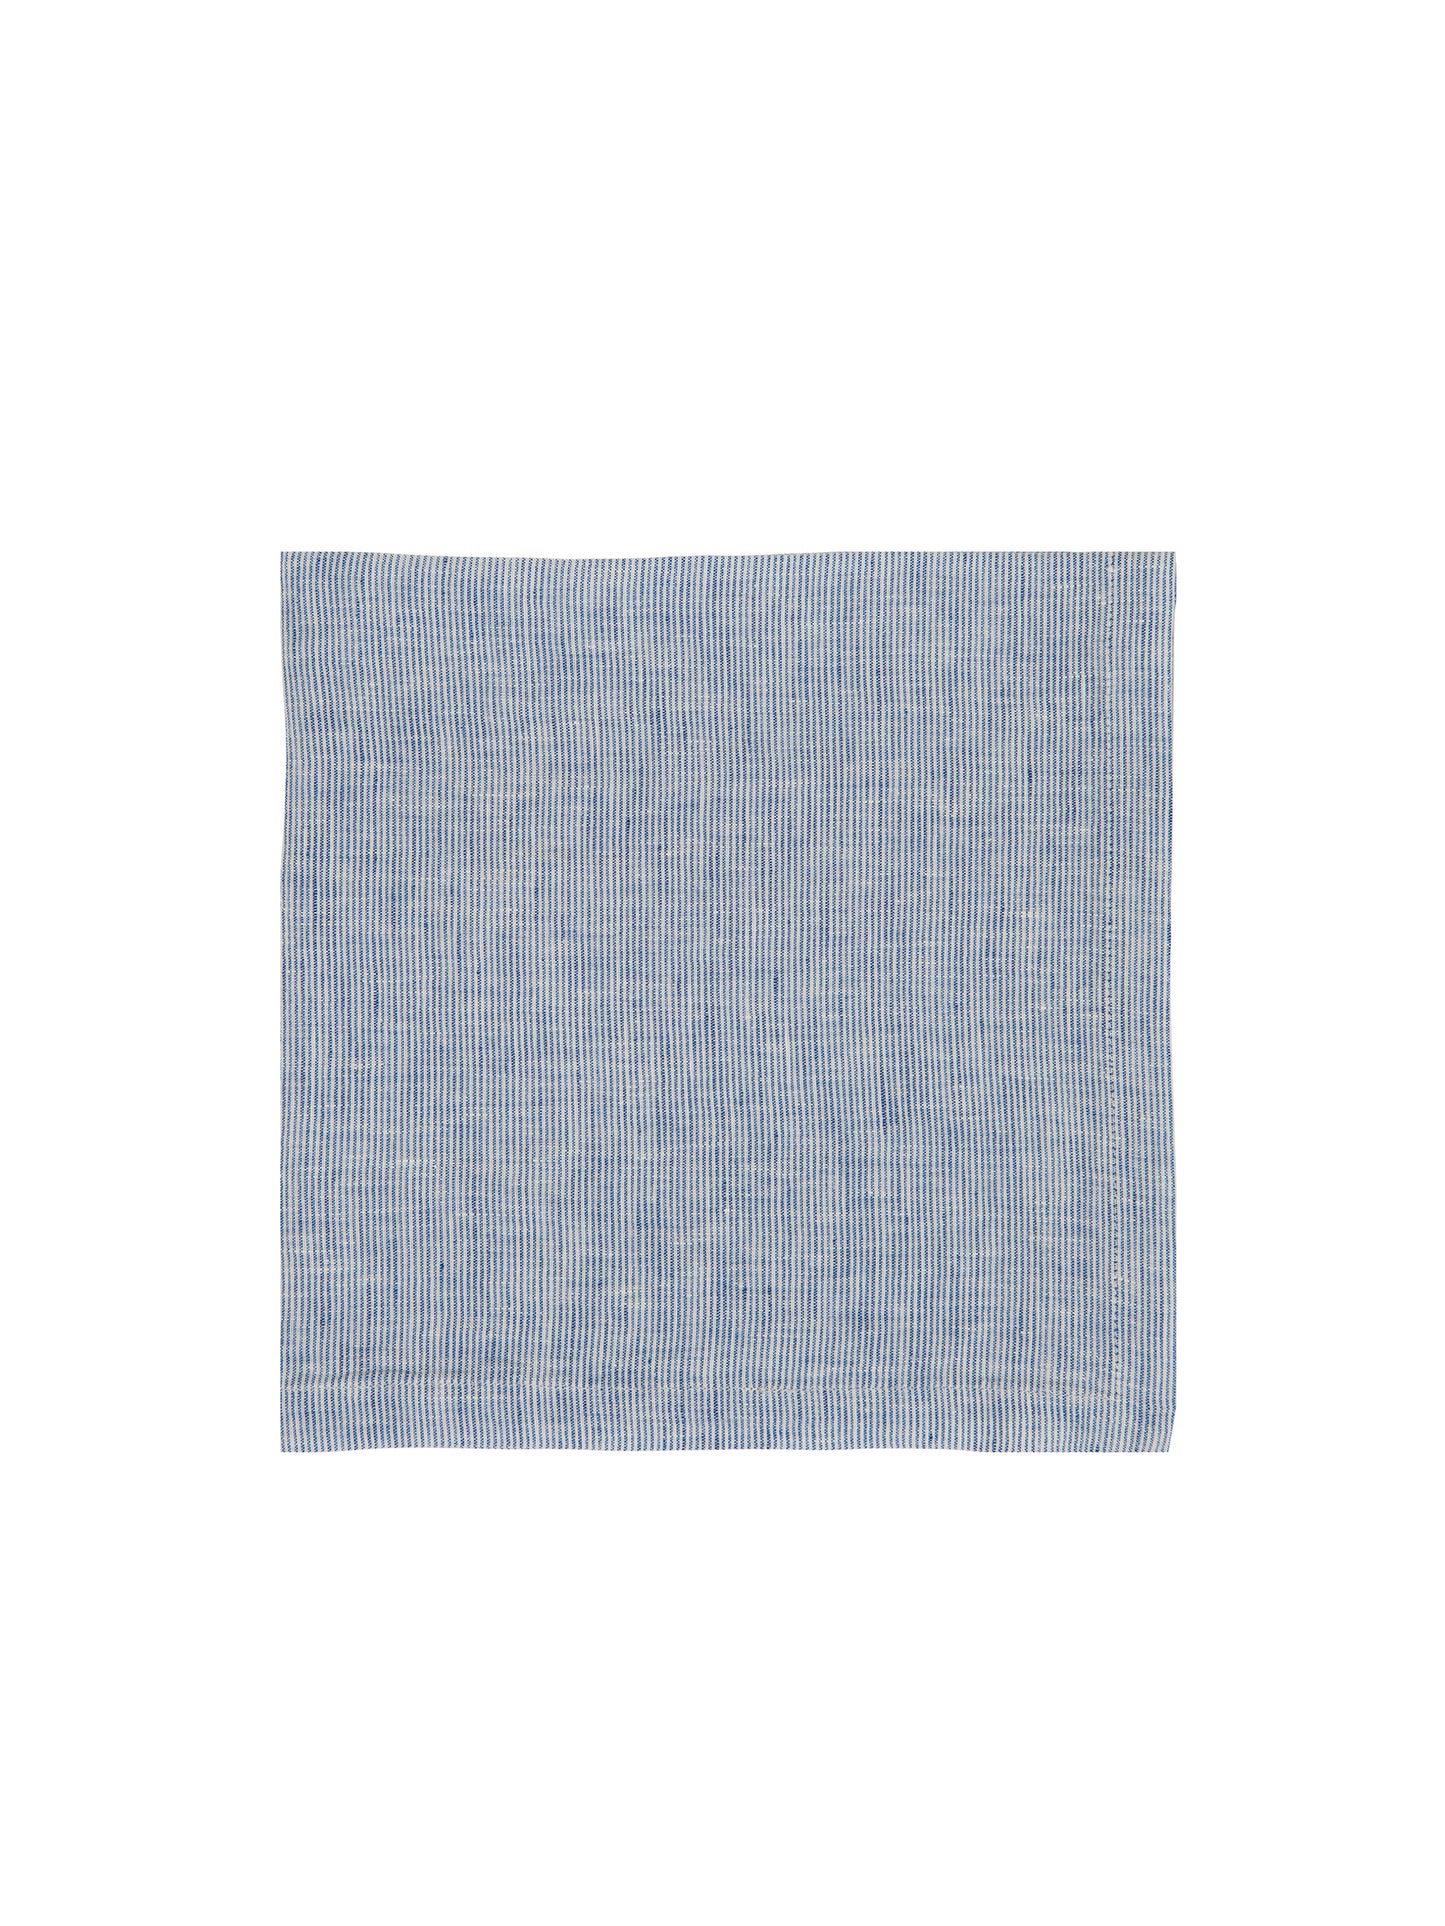 Cape Cod Blue Pinstriped Linen Collection Weston Table